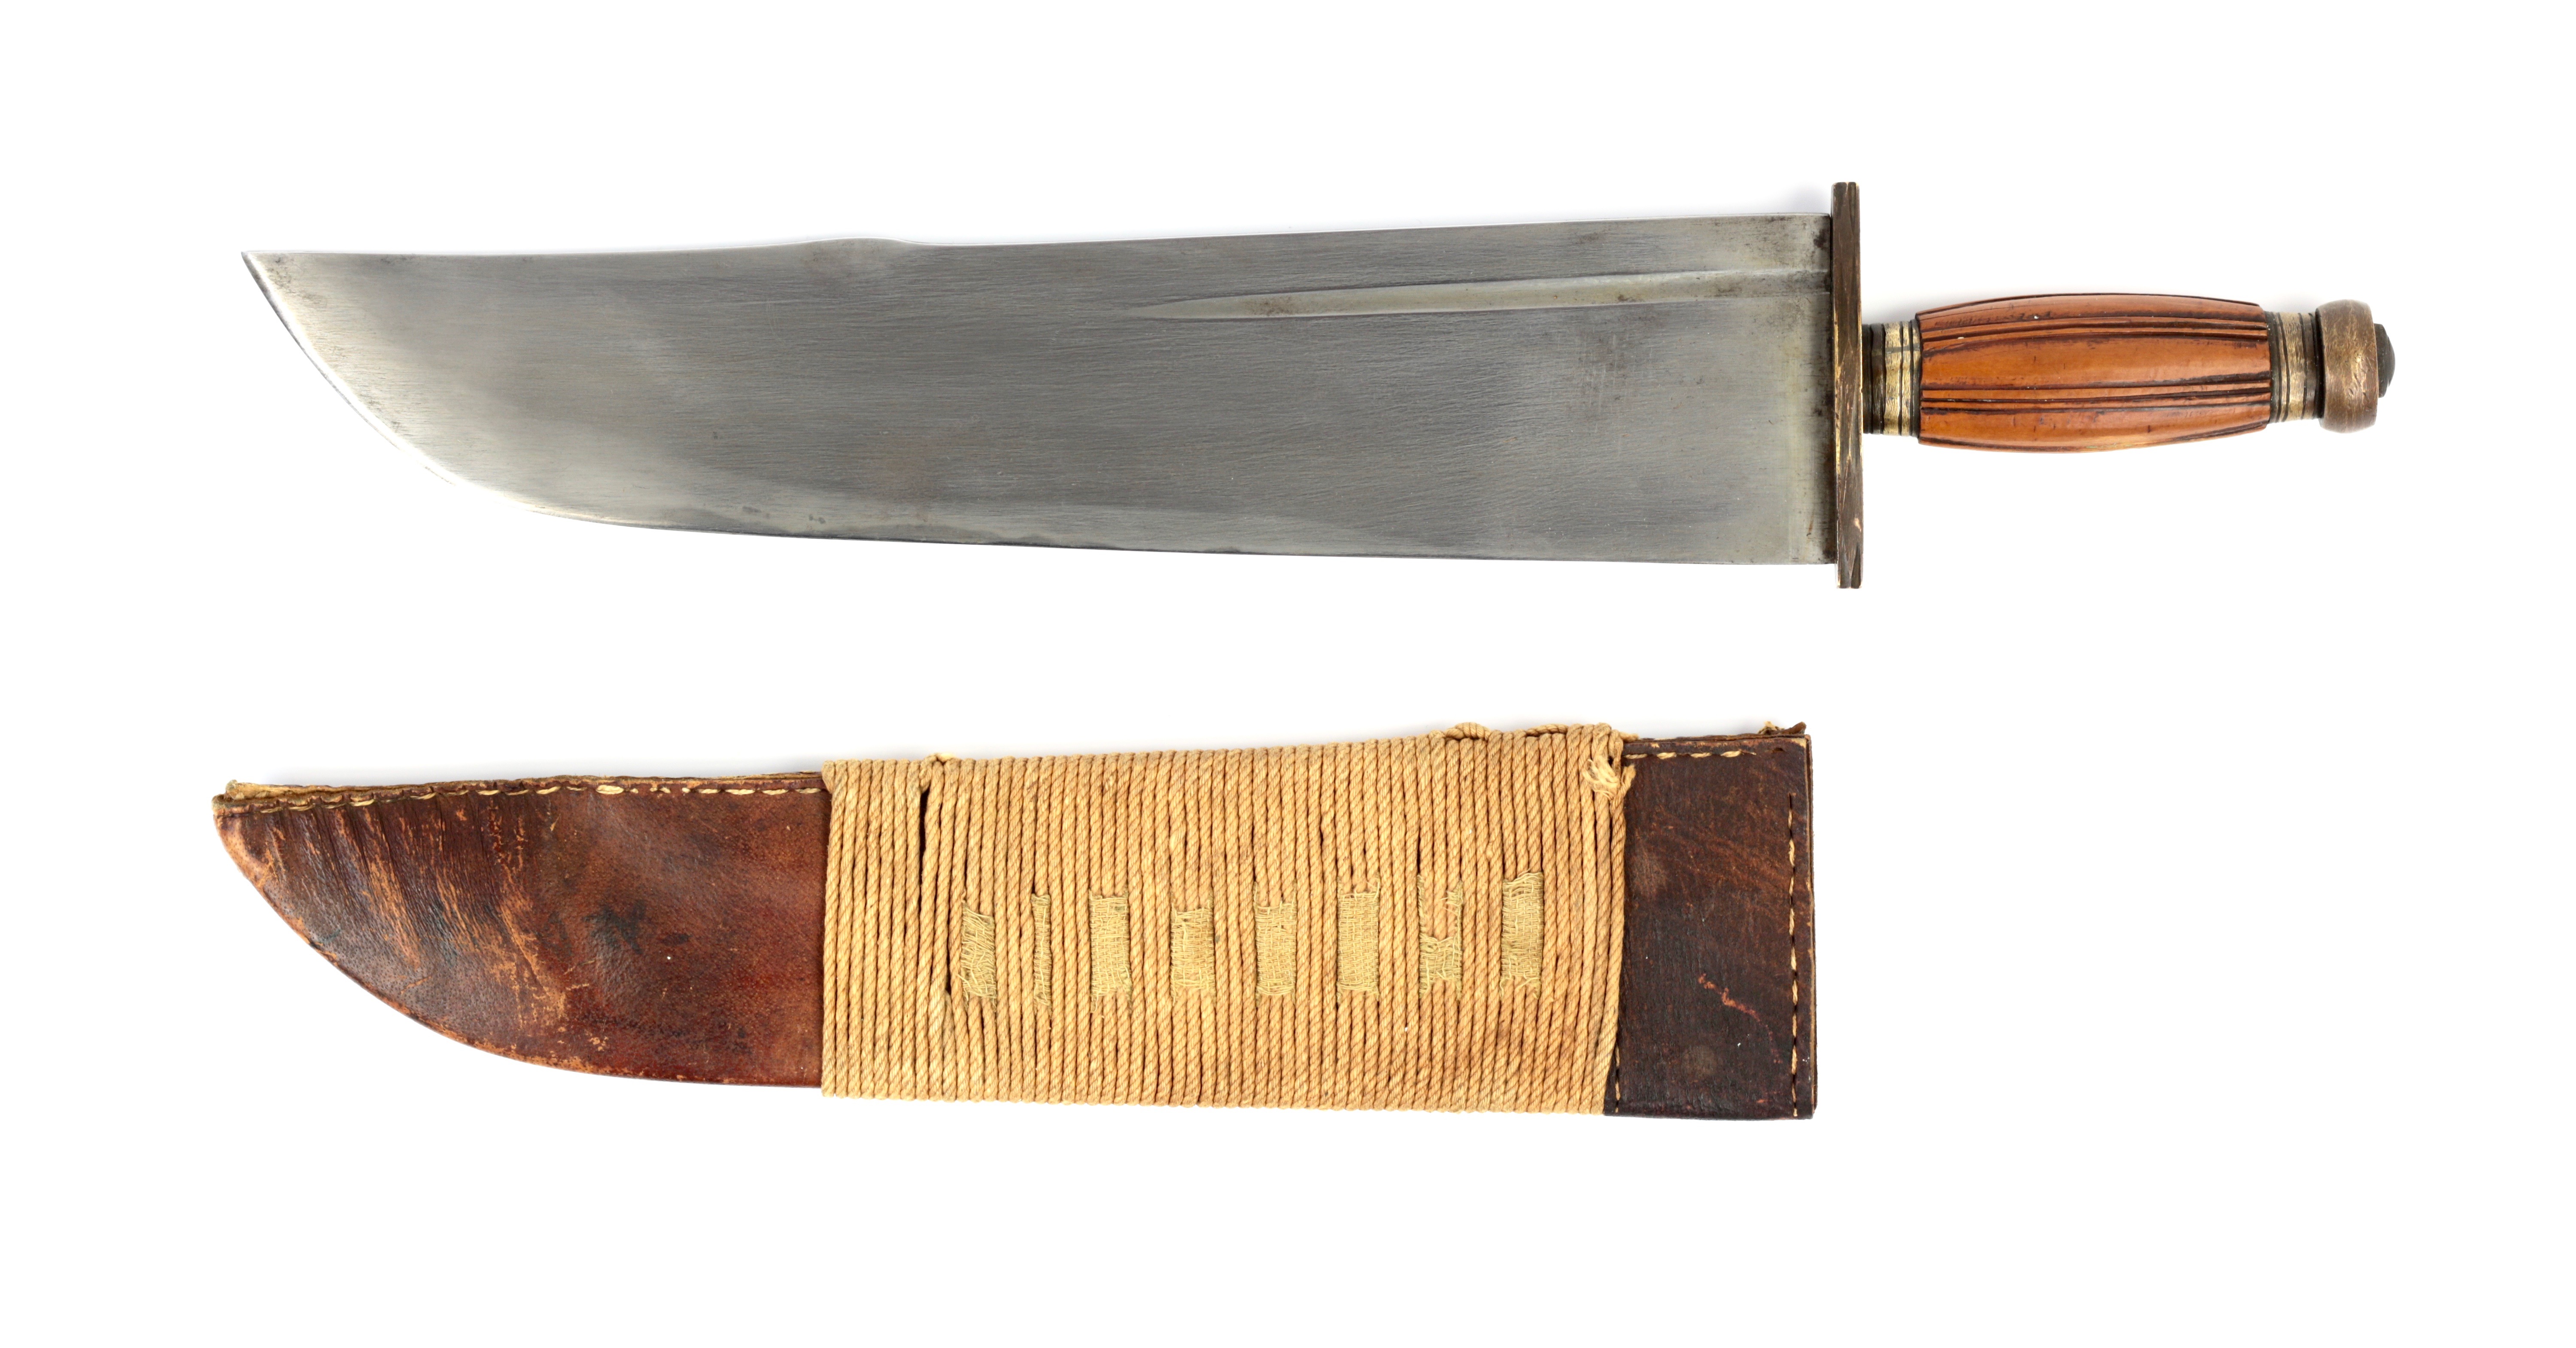 A wide-bladed Chinese fighting knife